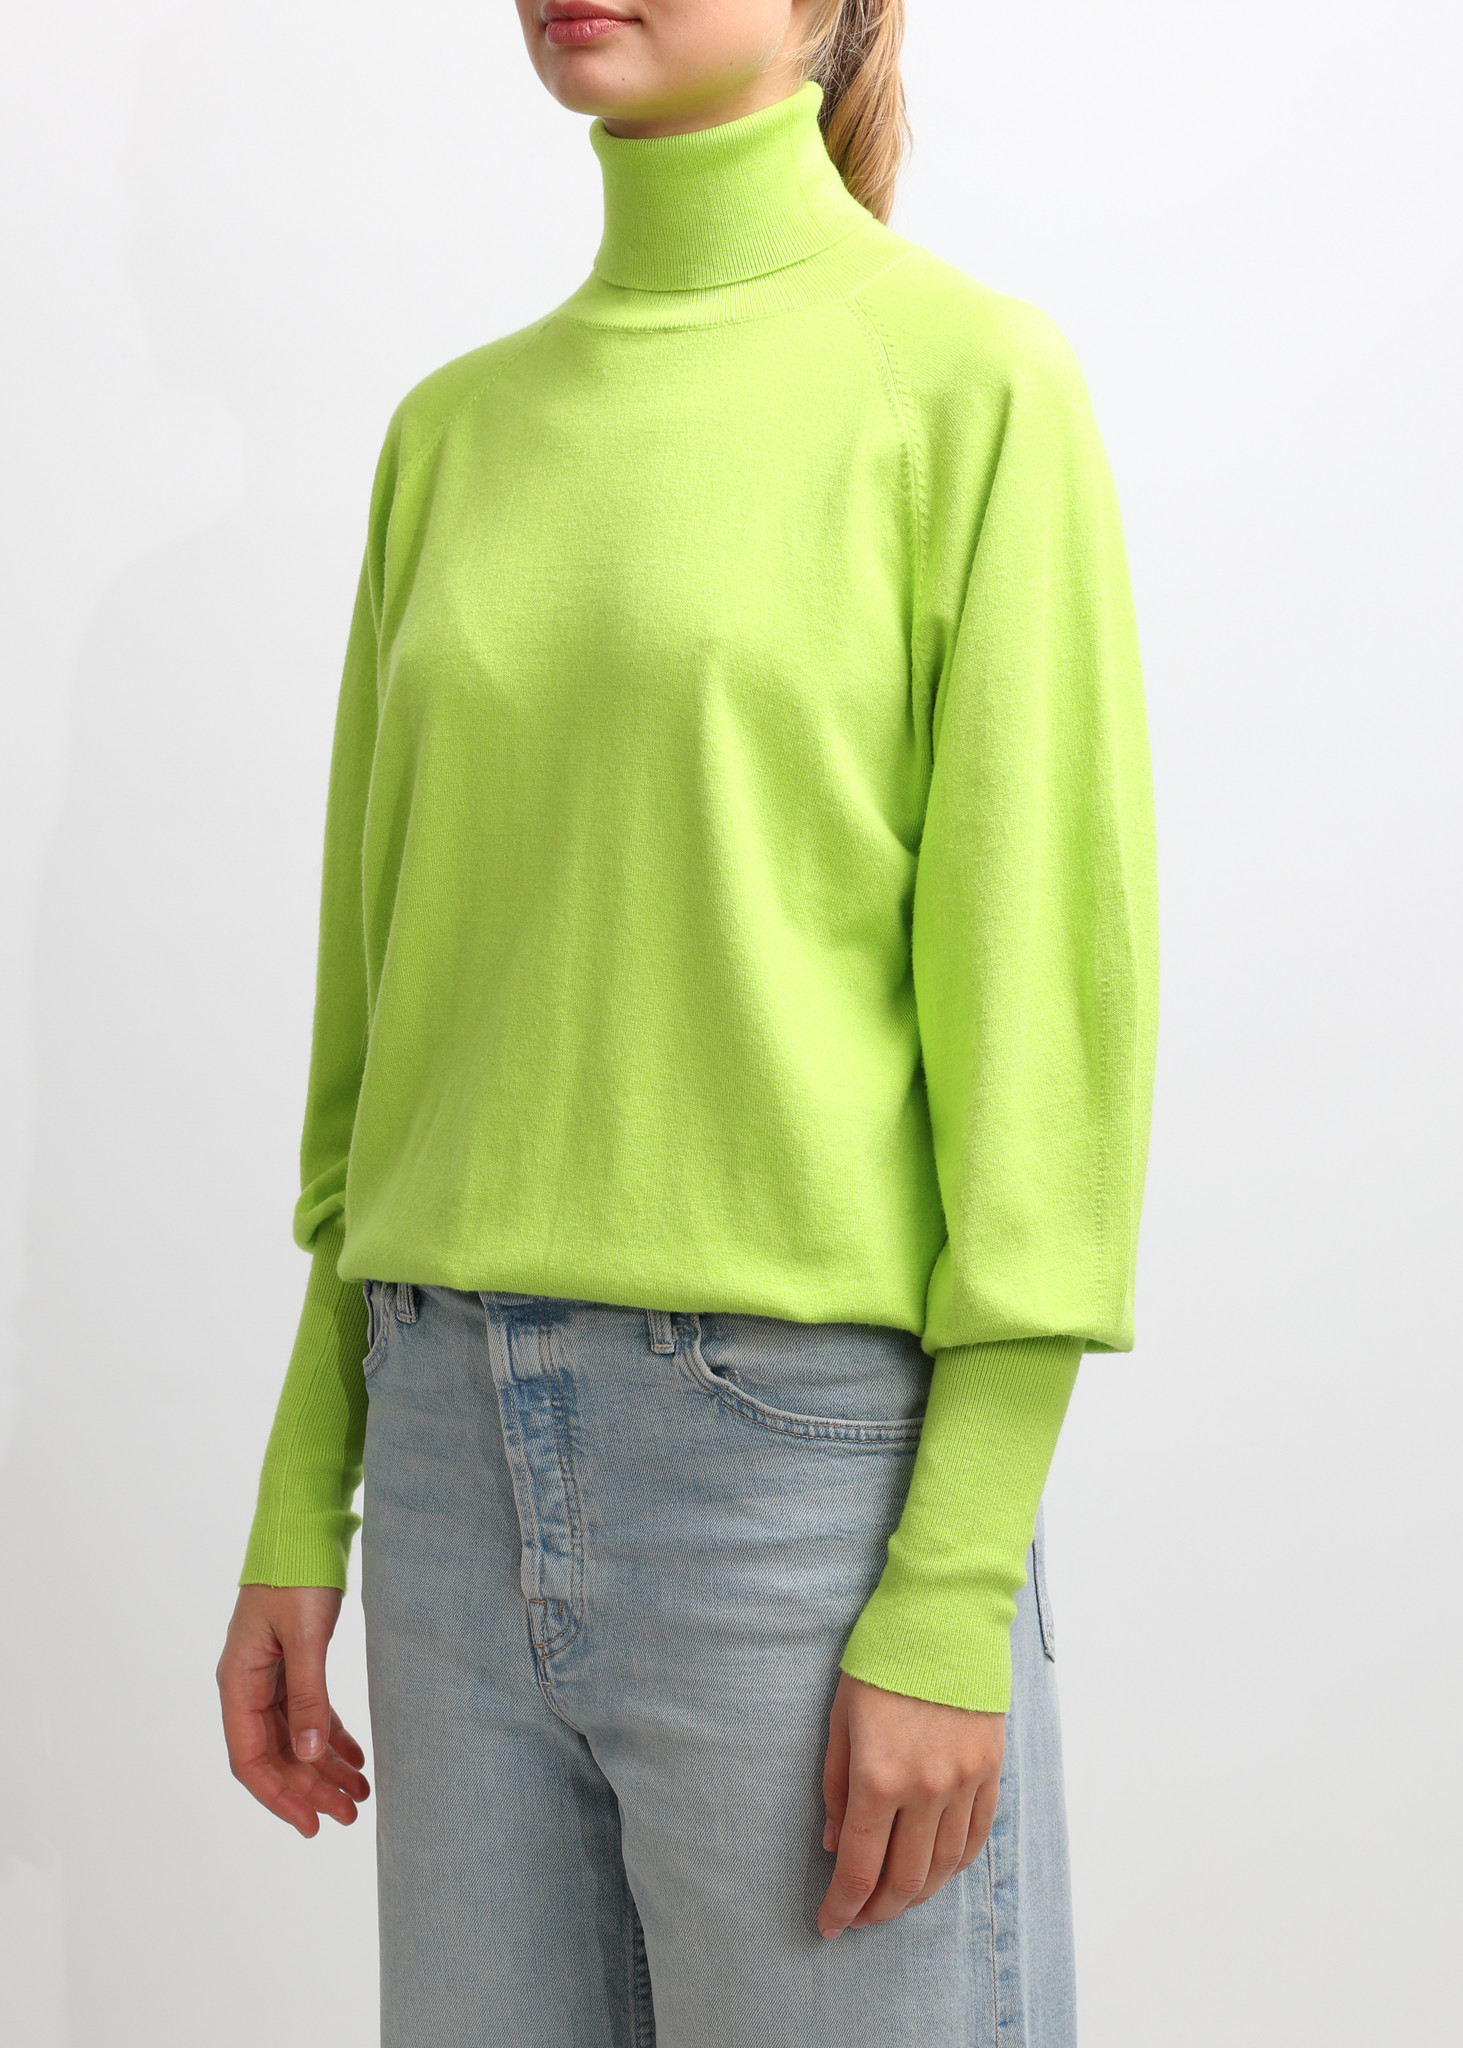 PUFF SLEEVES TURTLENECK IN LIME GREEN-4